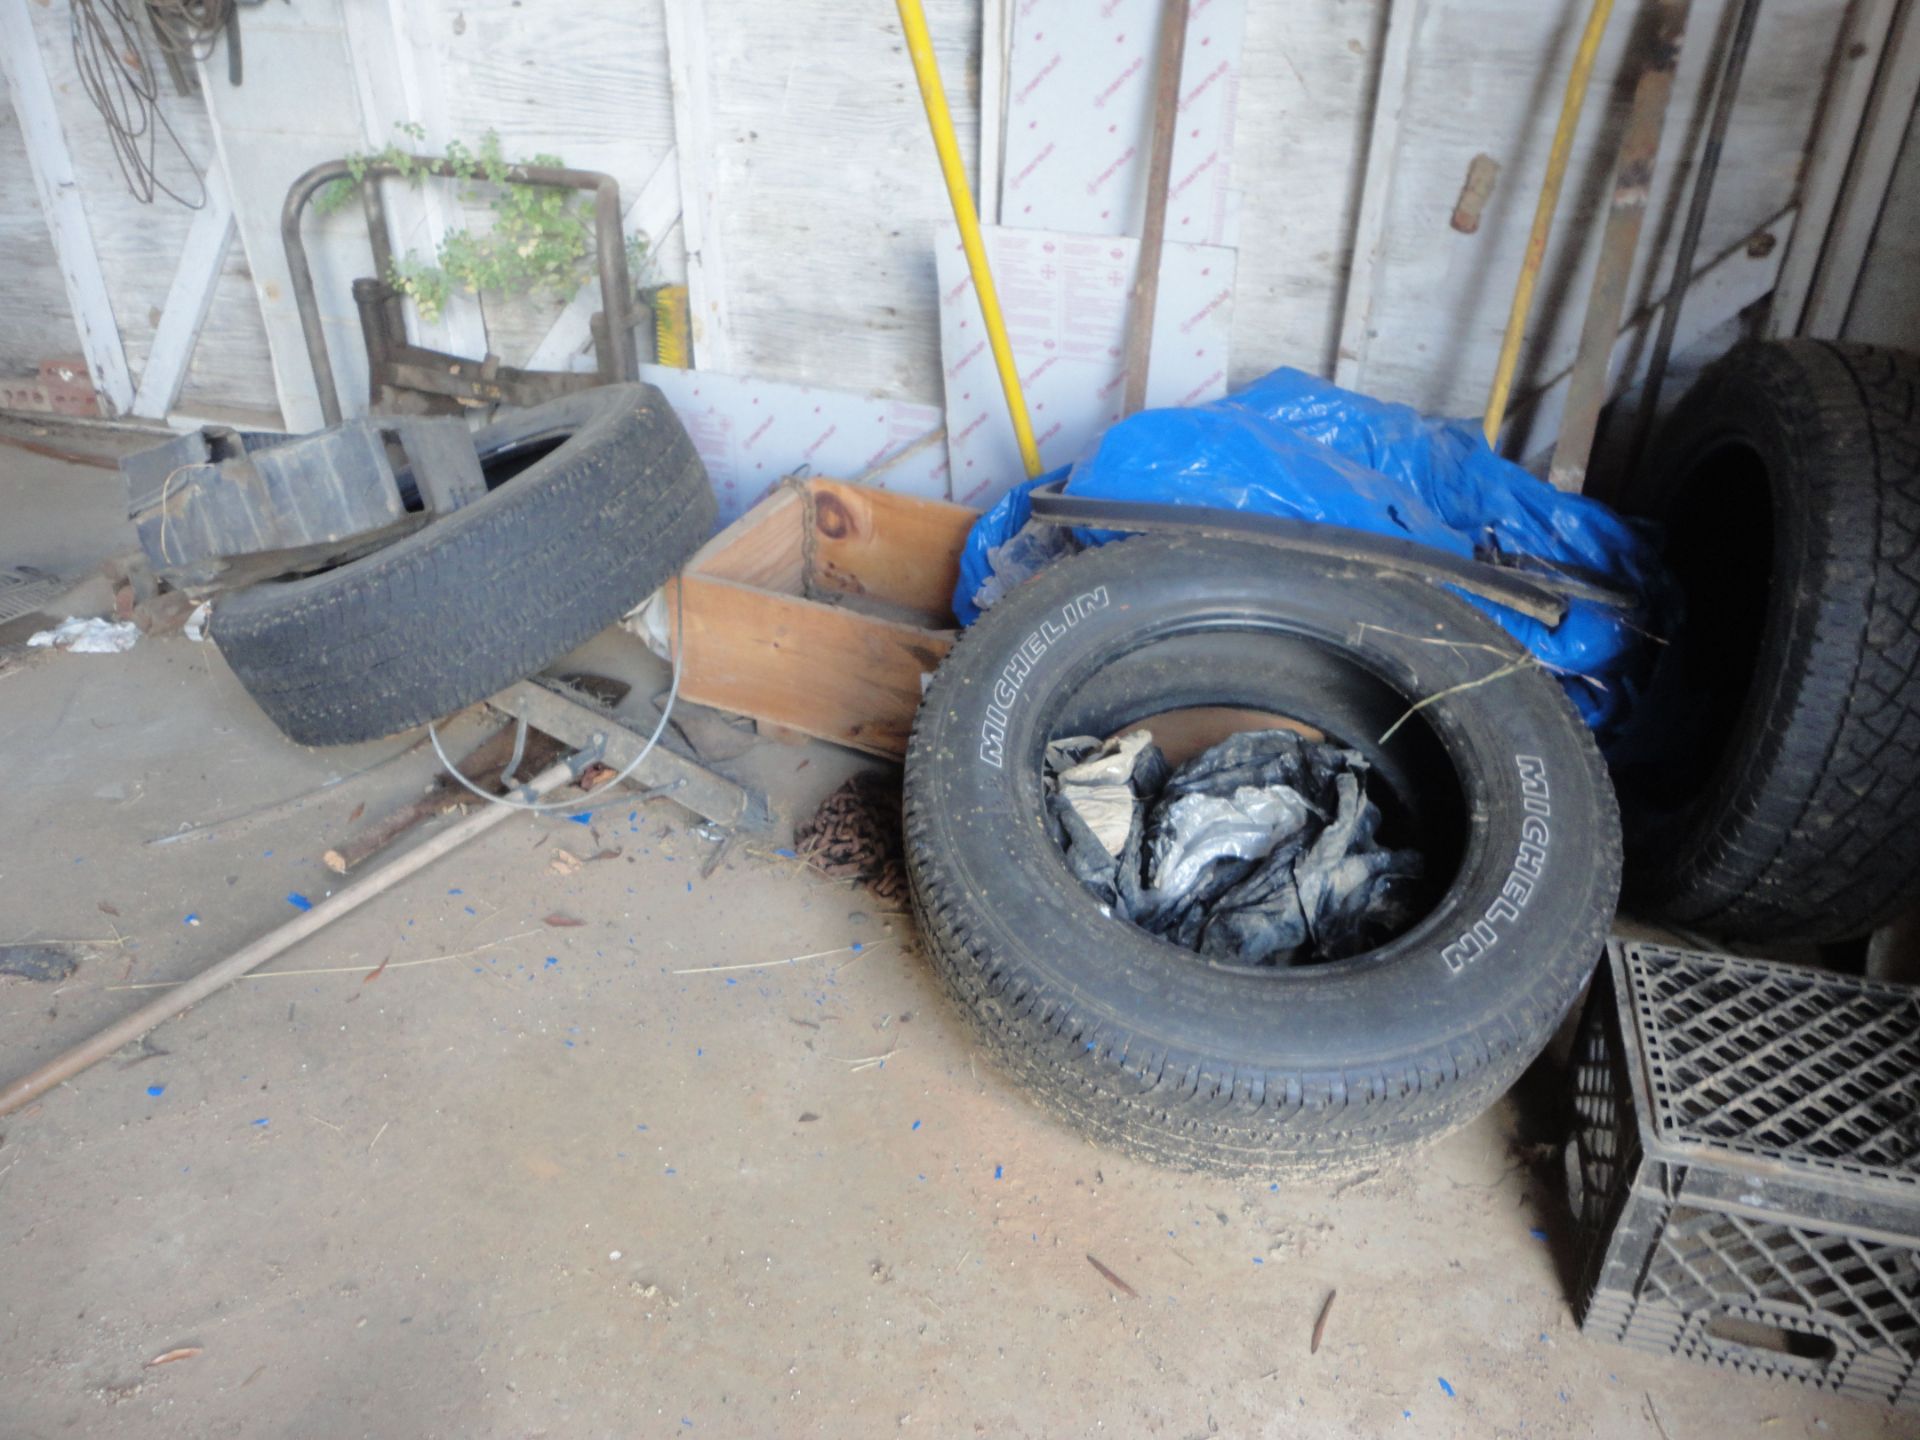 (LOT) CONTENTS IN & AROUND SIDES OF BUILDING OF MECHANICS SHOP **NOTHING AFFIXED TO BUILDING** - Image 5 of 8